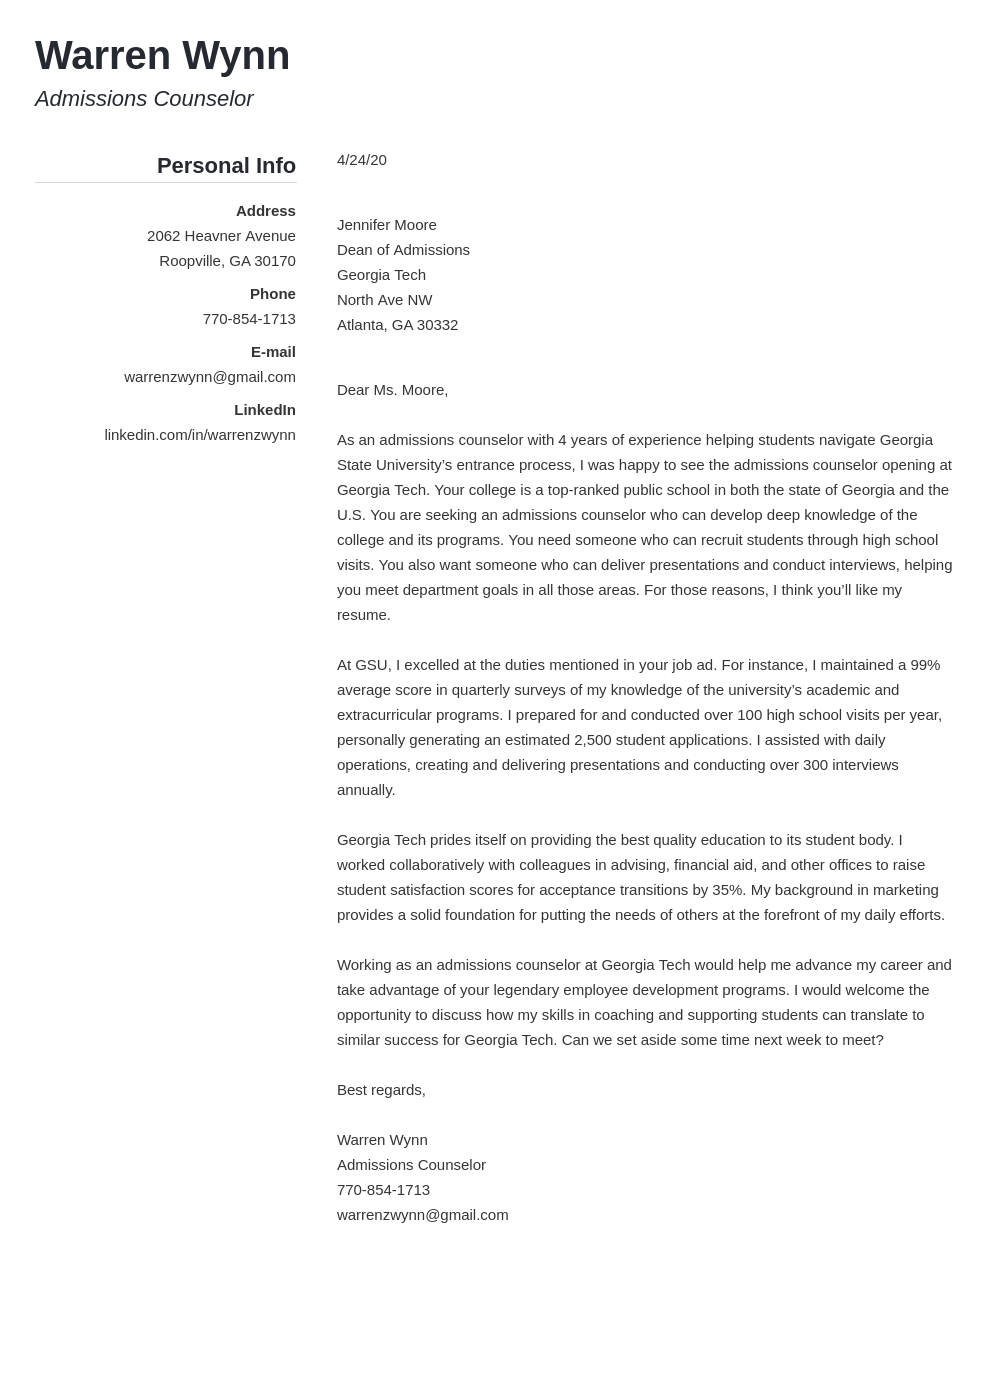 Admissions Counselor Cover Letter Examples & Writing Guide